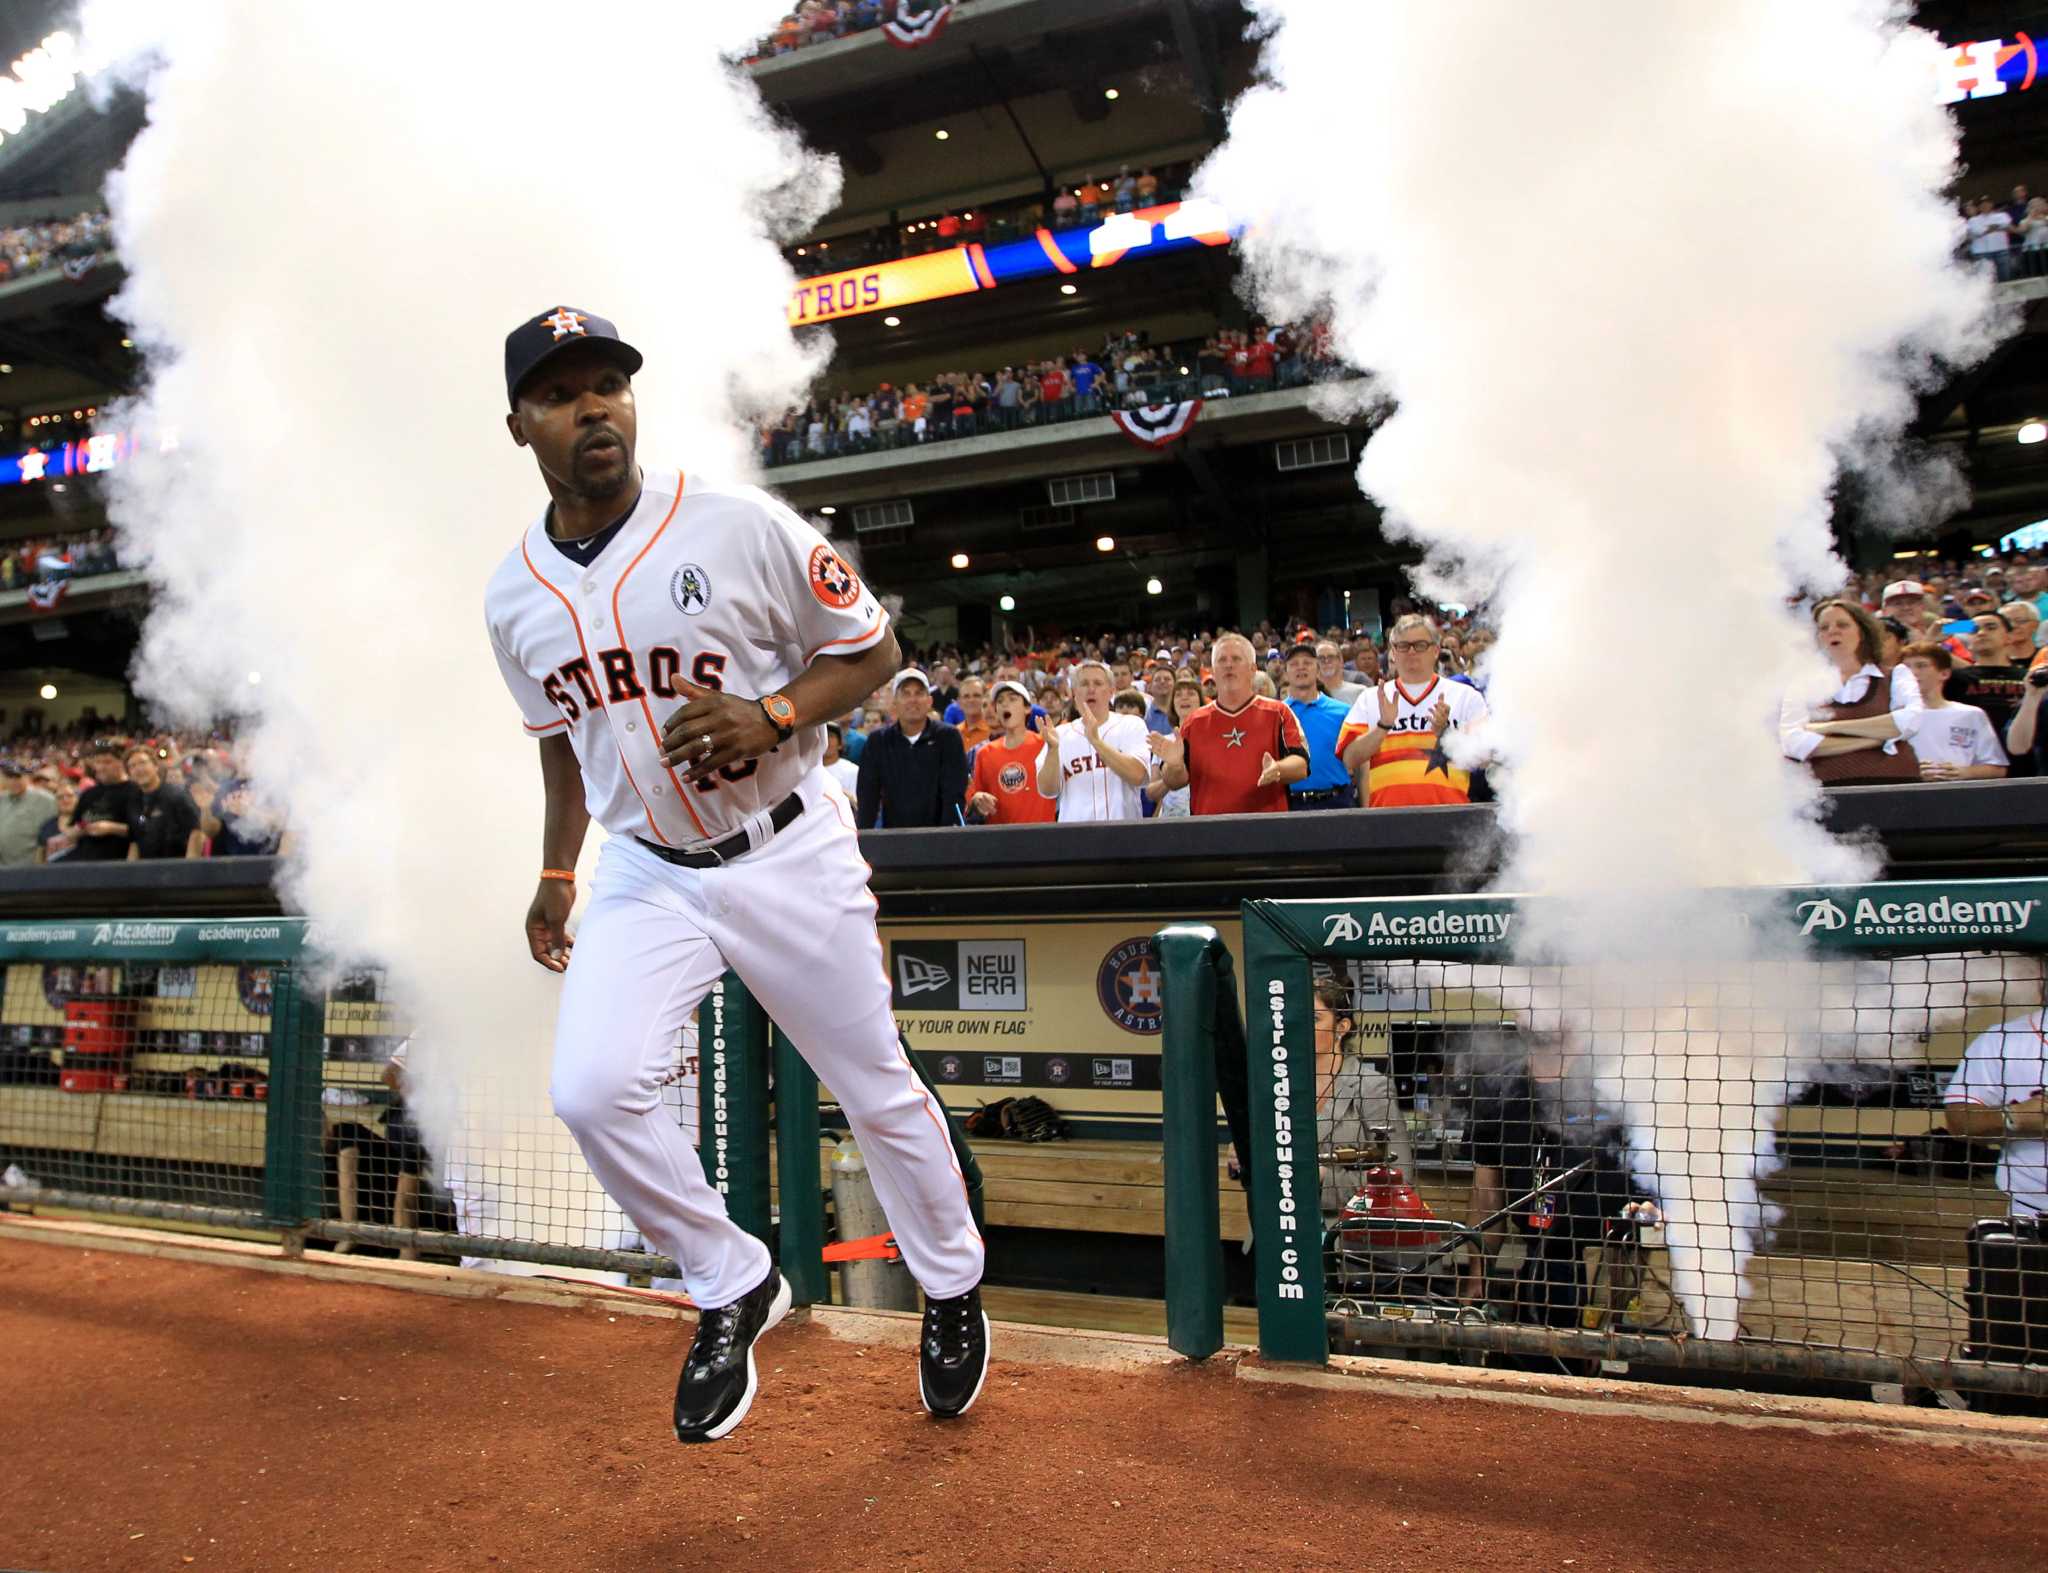 Ken Hoffman on why announcers should stop mentioning Jose Altuve's height -  CultureMap Houston